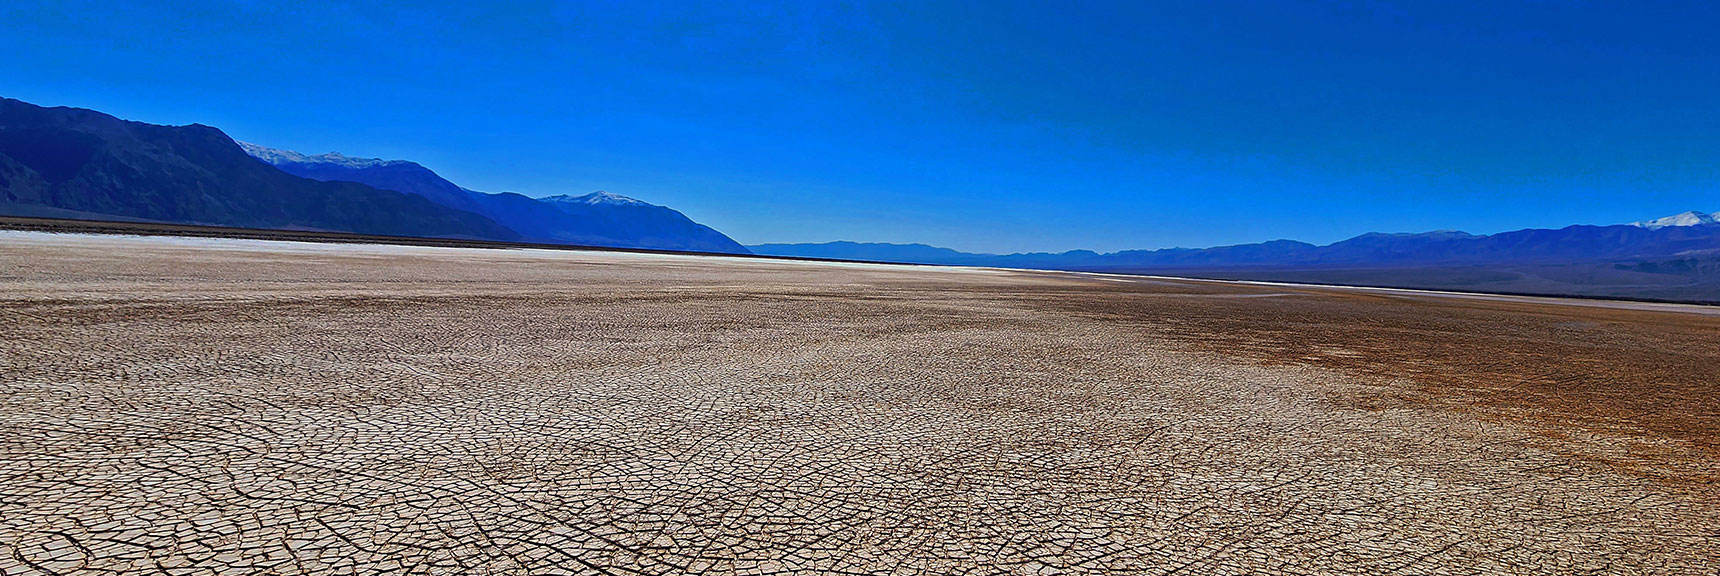 View South from Mid Valley. Darker Soil on Right is Deep Deep Mud | Death Valley Crossing | Death Valley National Park, California | David Smith | LasVegasAreaTrails.com